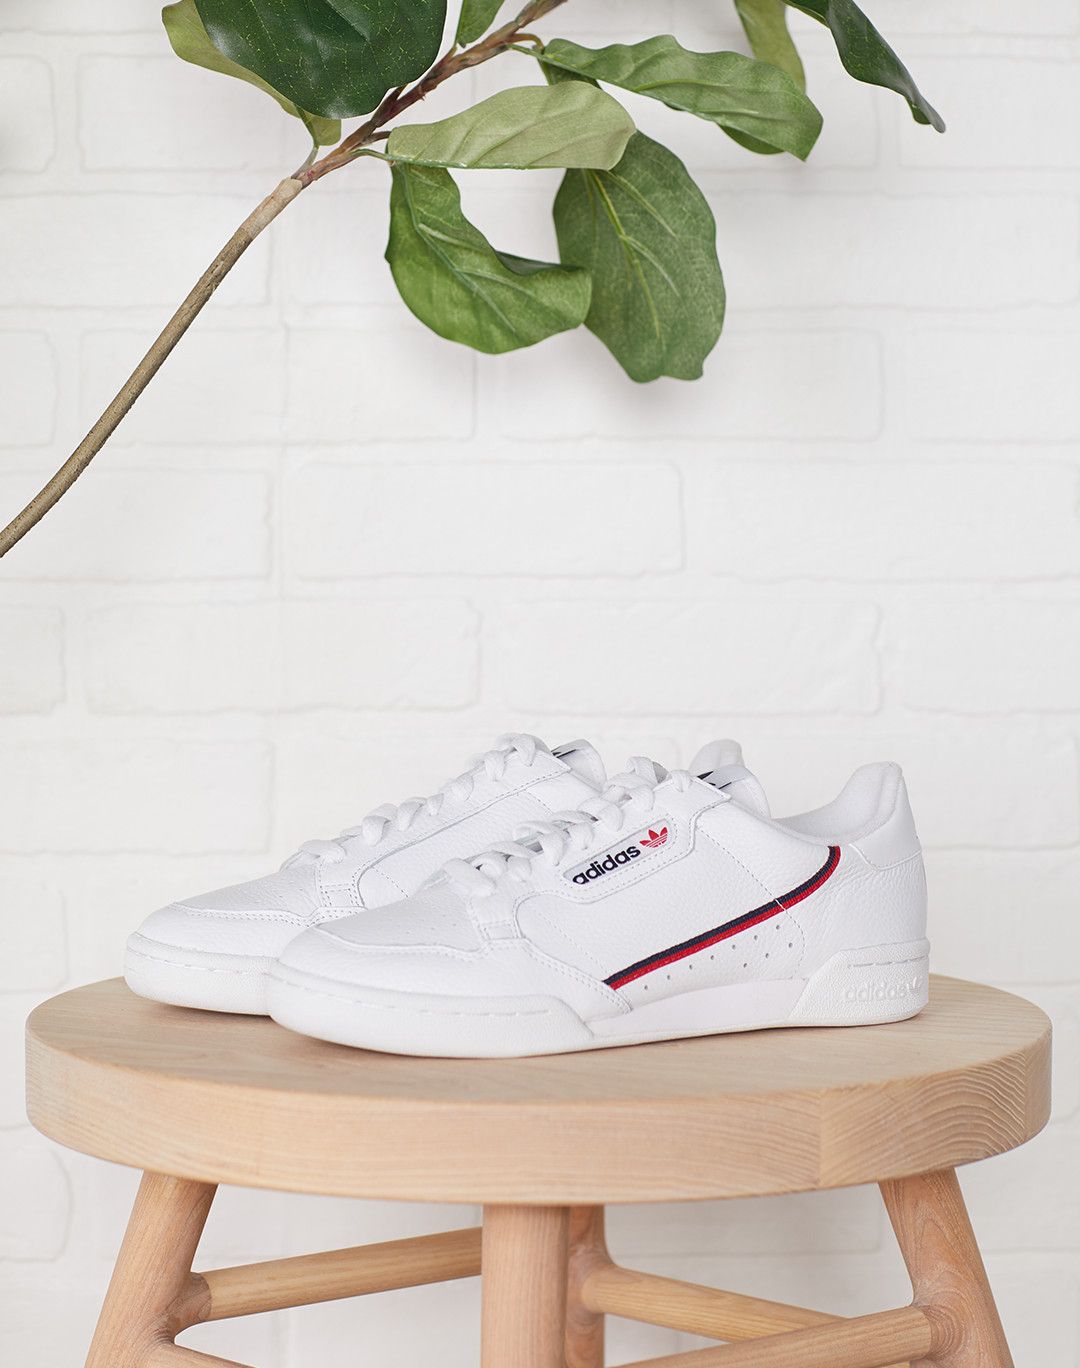 The Fresh White Sneaker That Everyone Can (and Should) Wear This Spring